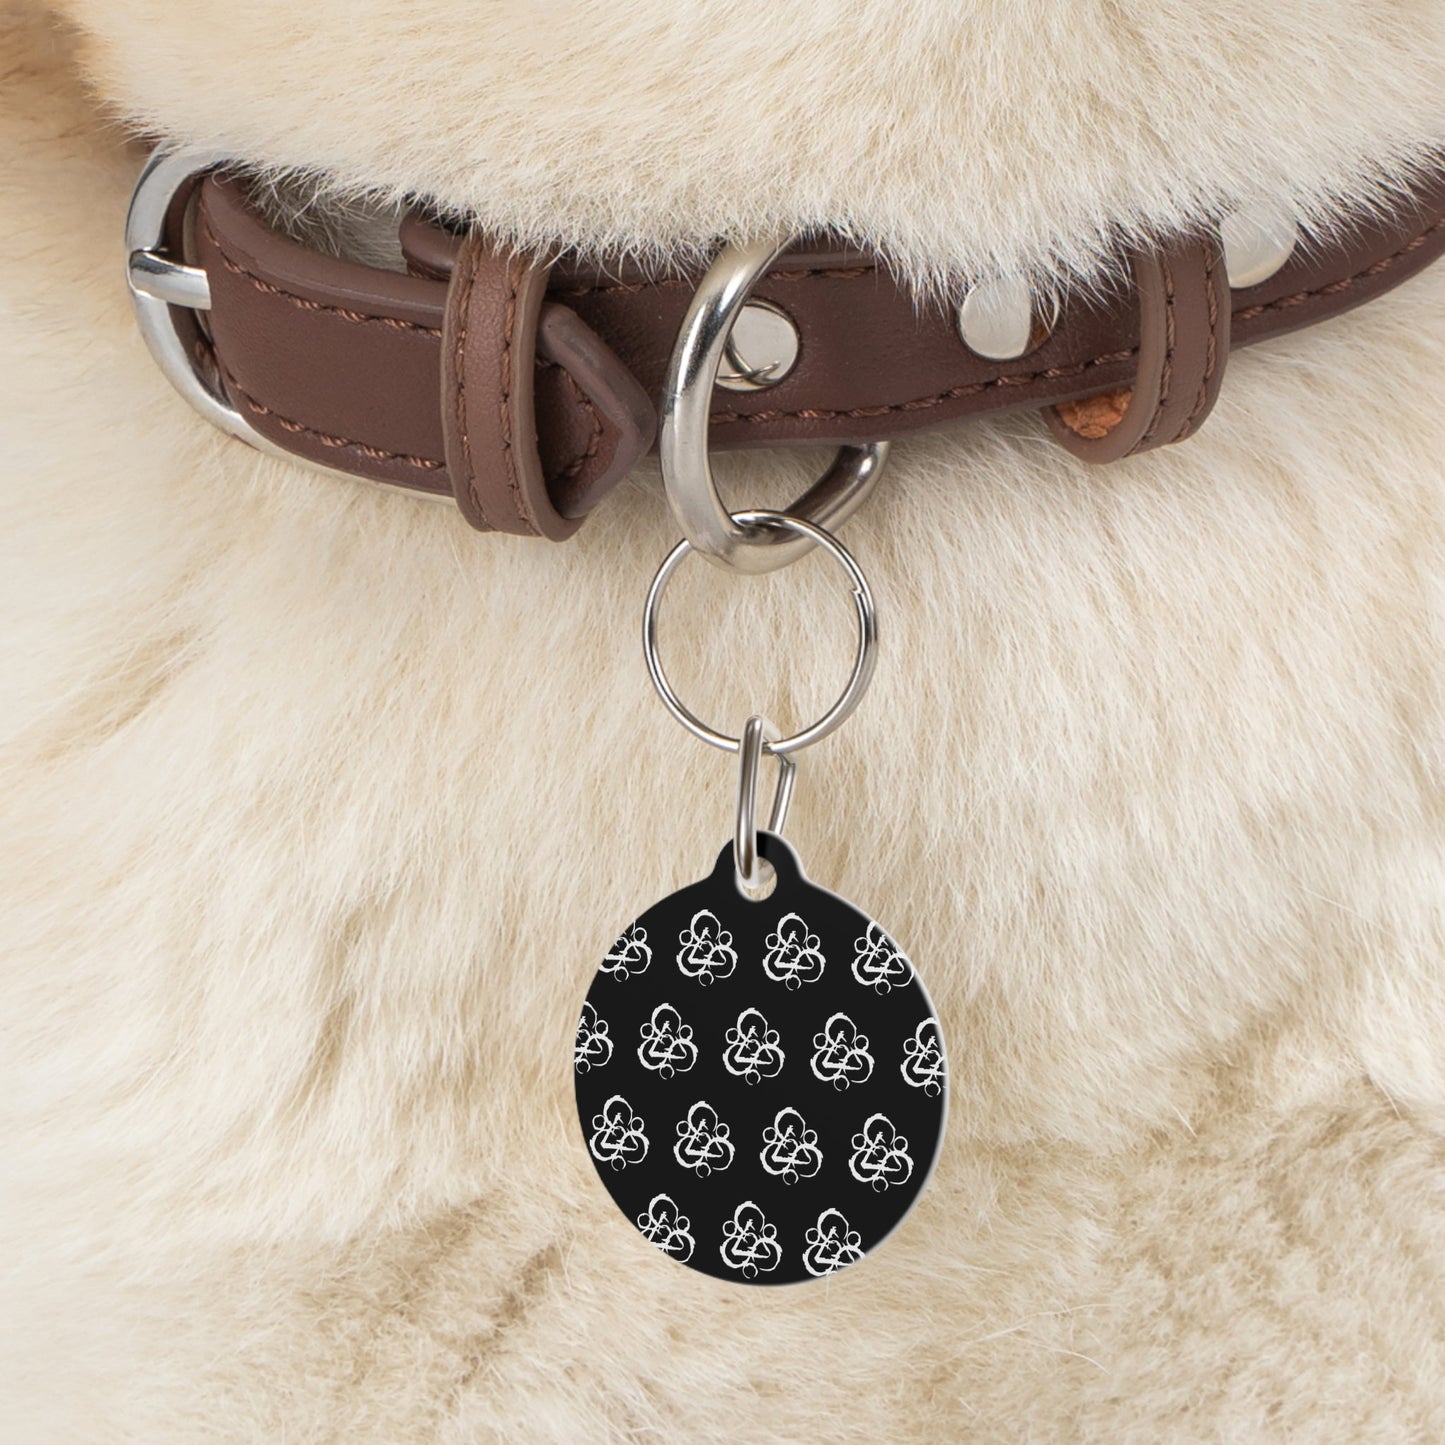 Coheed and Cambria Pet Tag